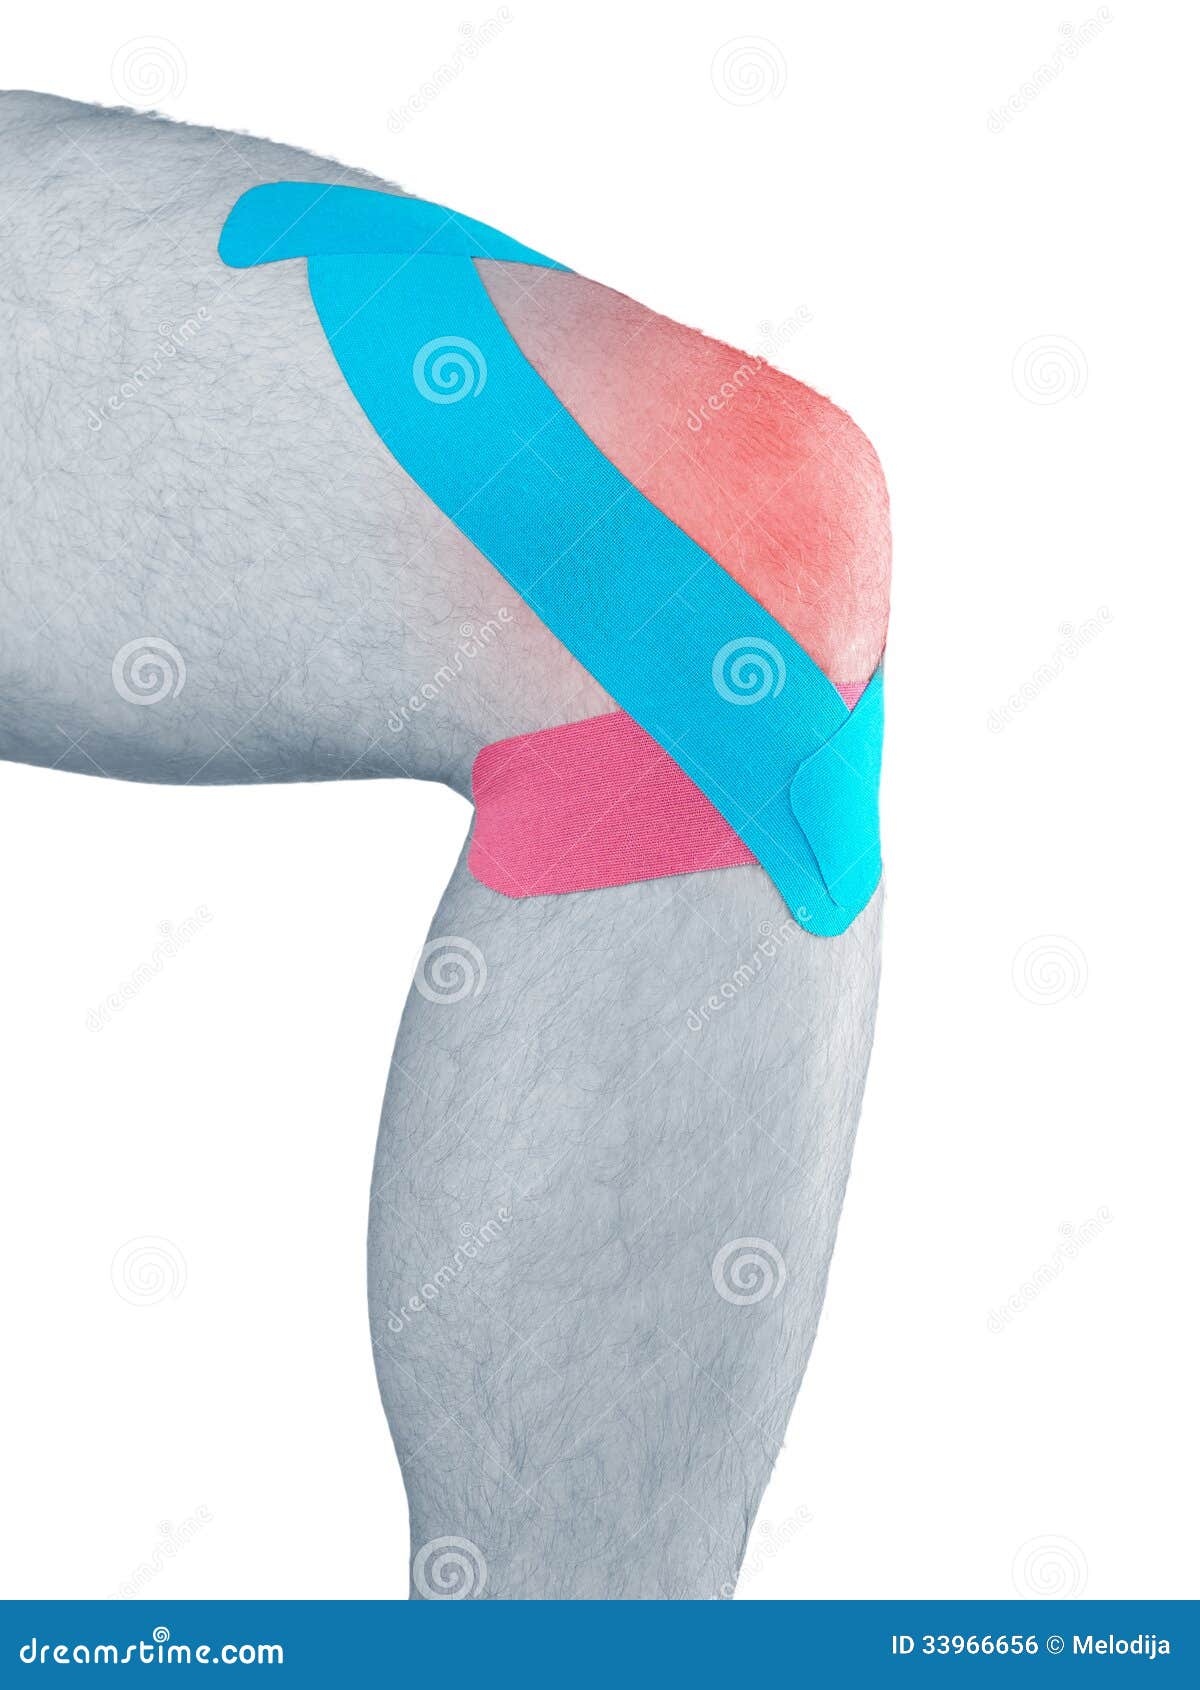 physiotherapy for knee pain, aches and tension